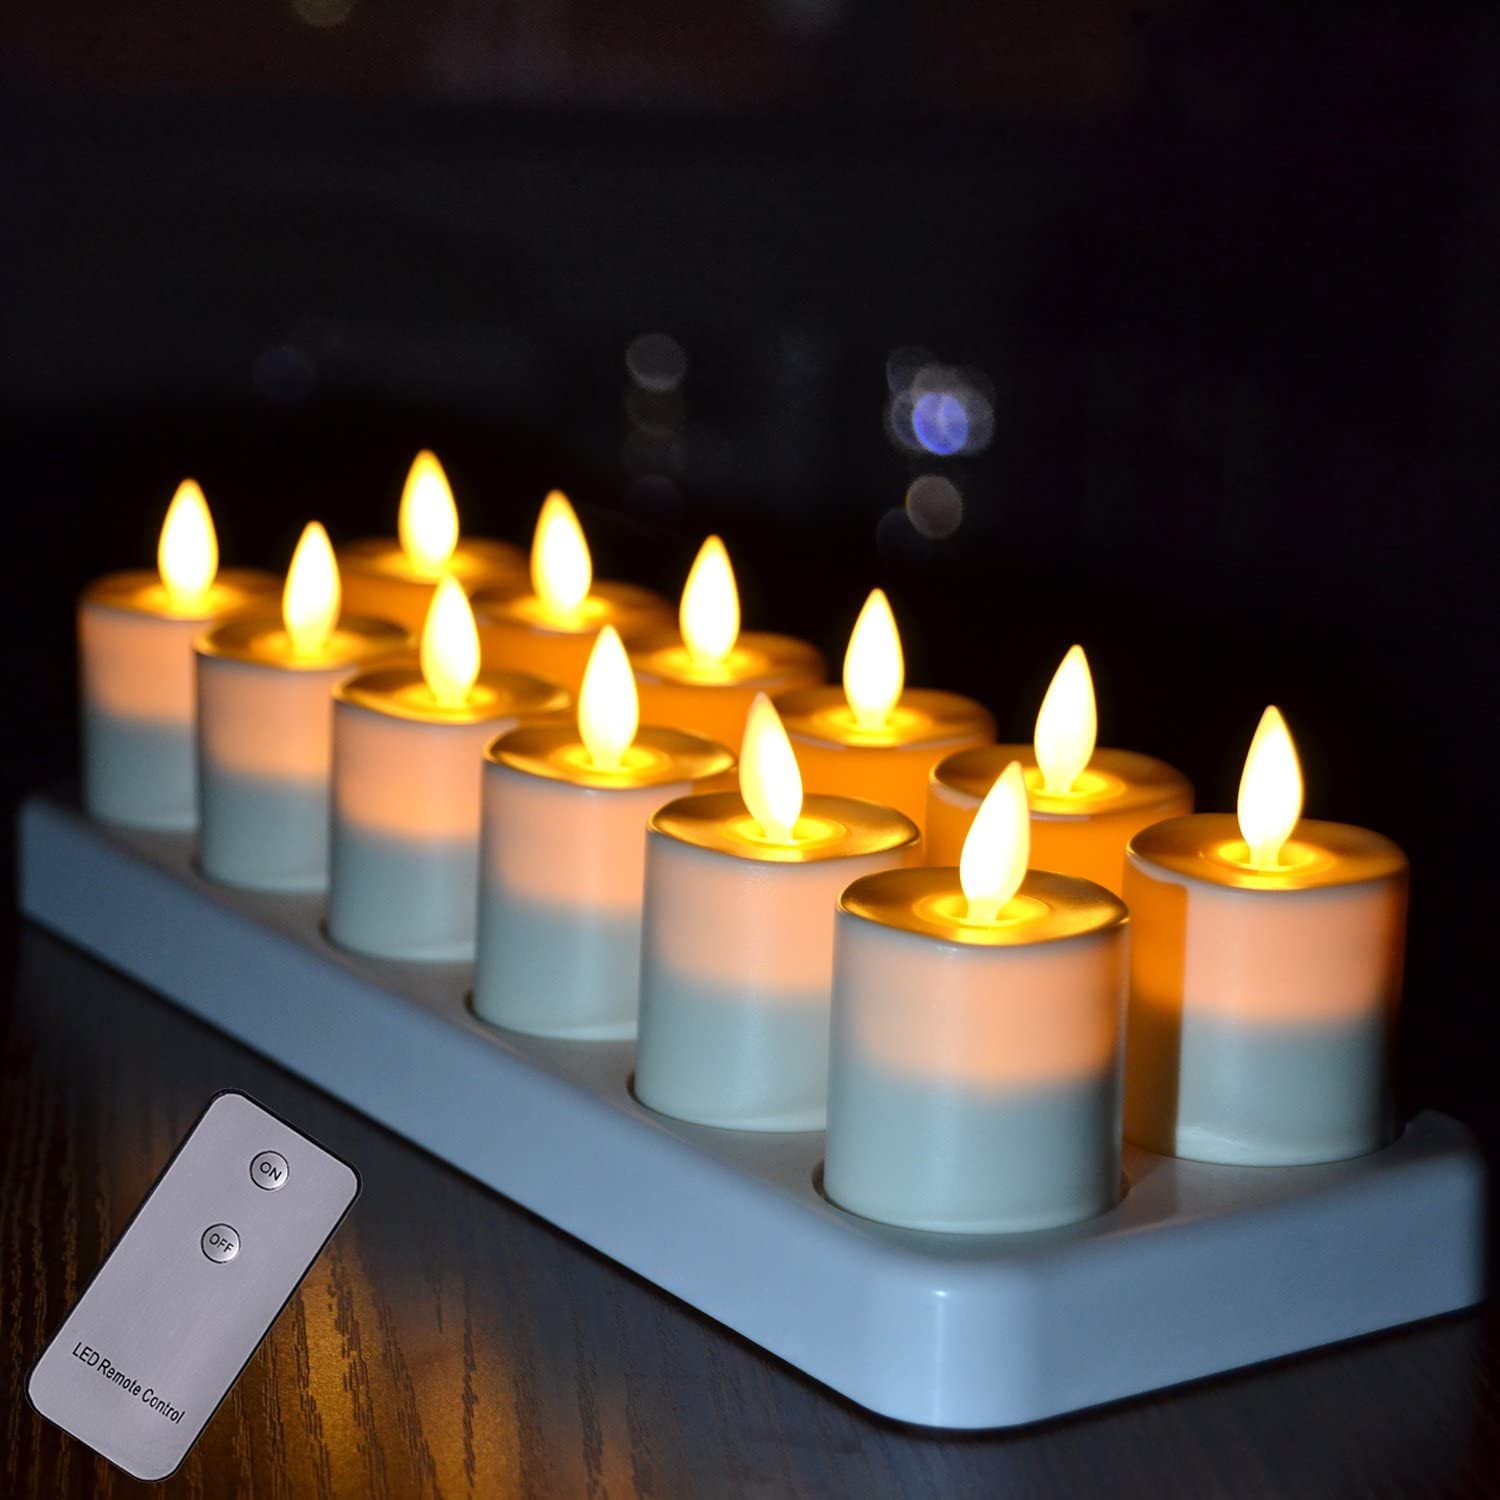 set of 12 Rechargeable led candle Flameless Tea Light electric lamp waxless Valentine Home Wedding church Table DIY decor-AMBER